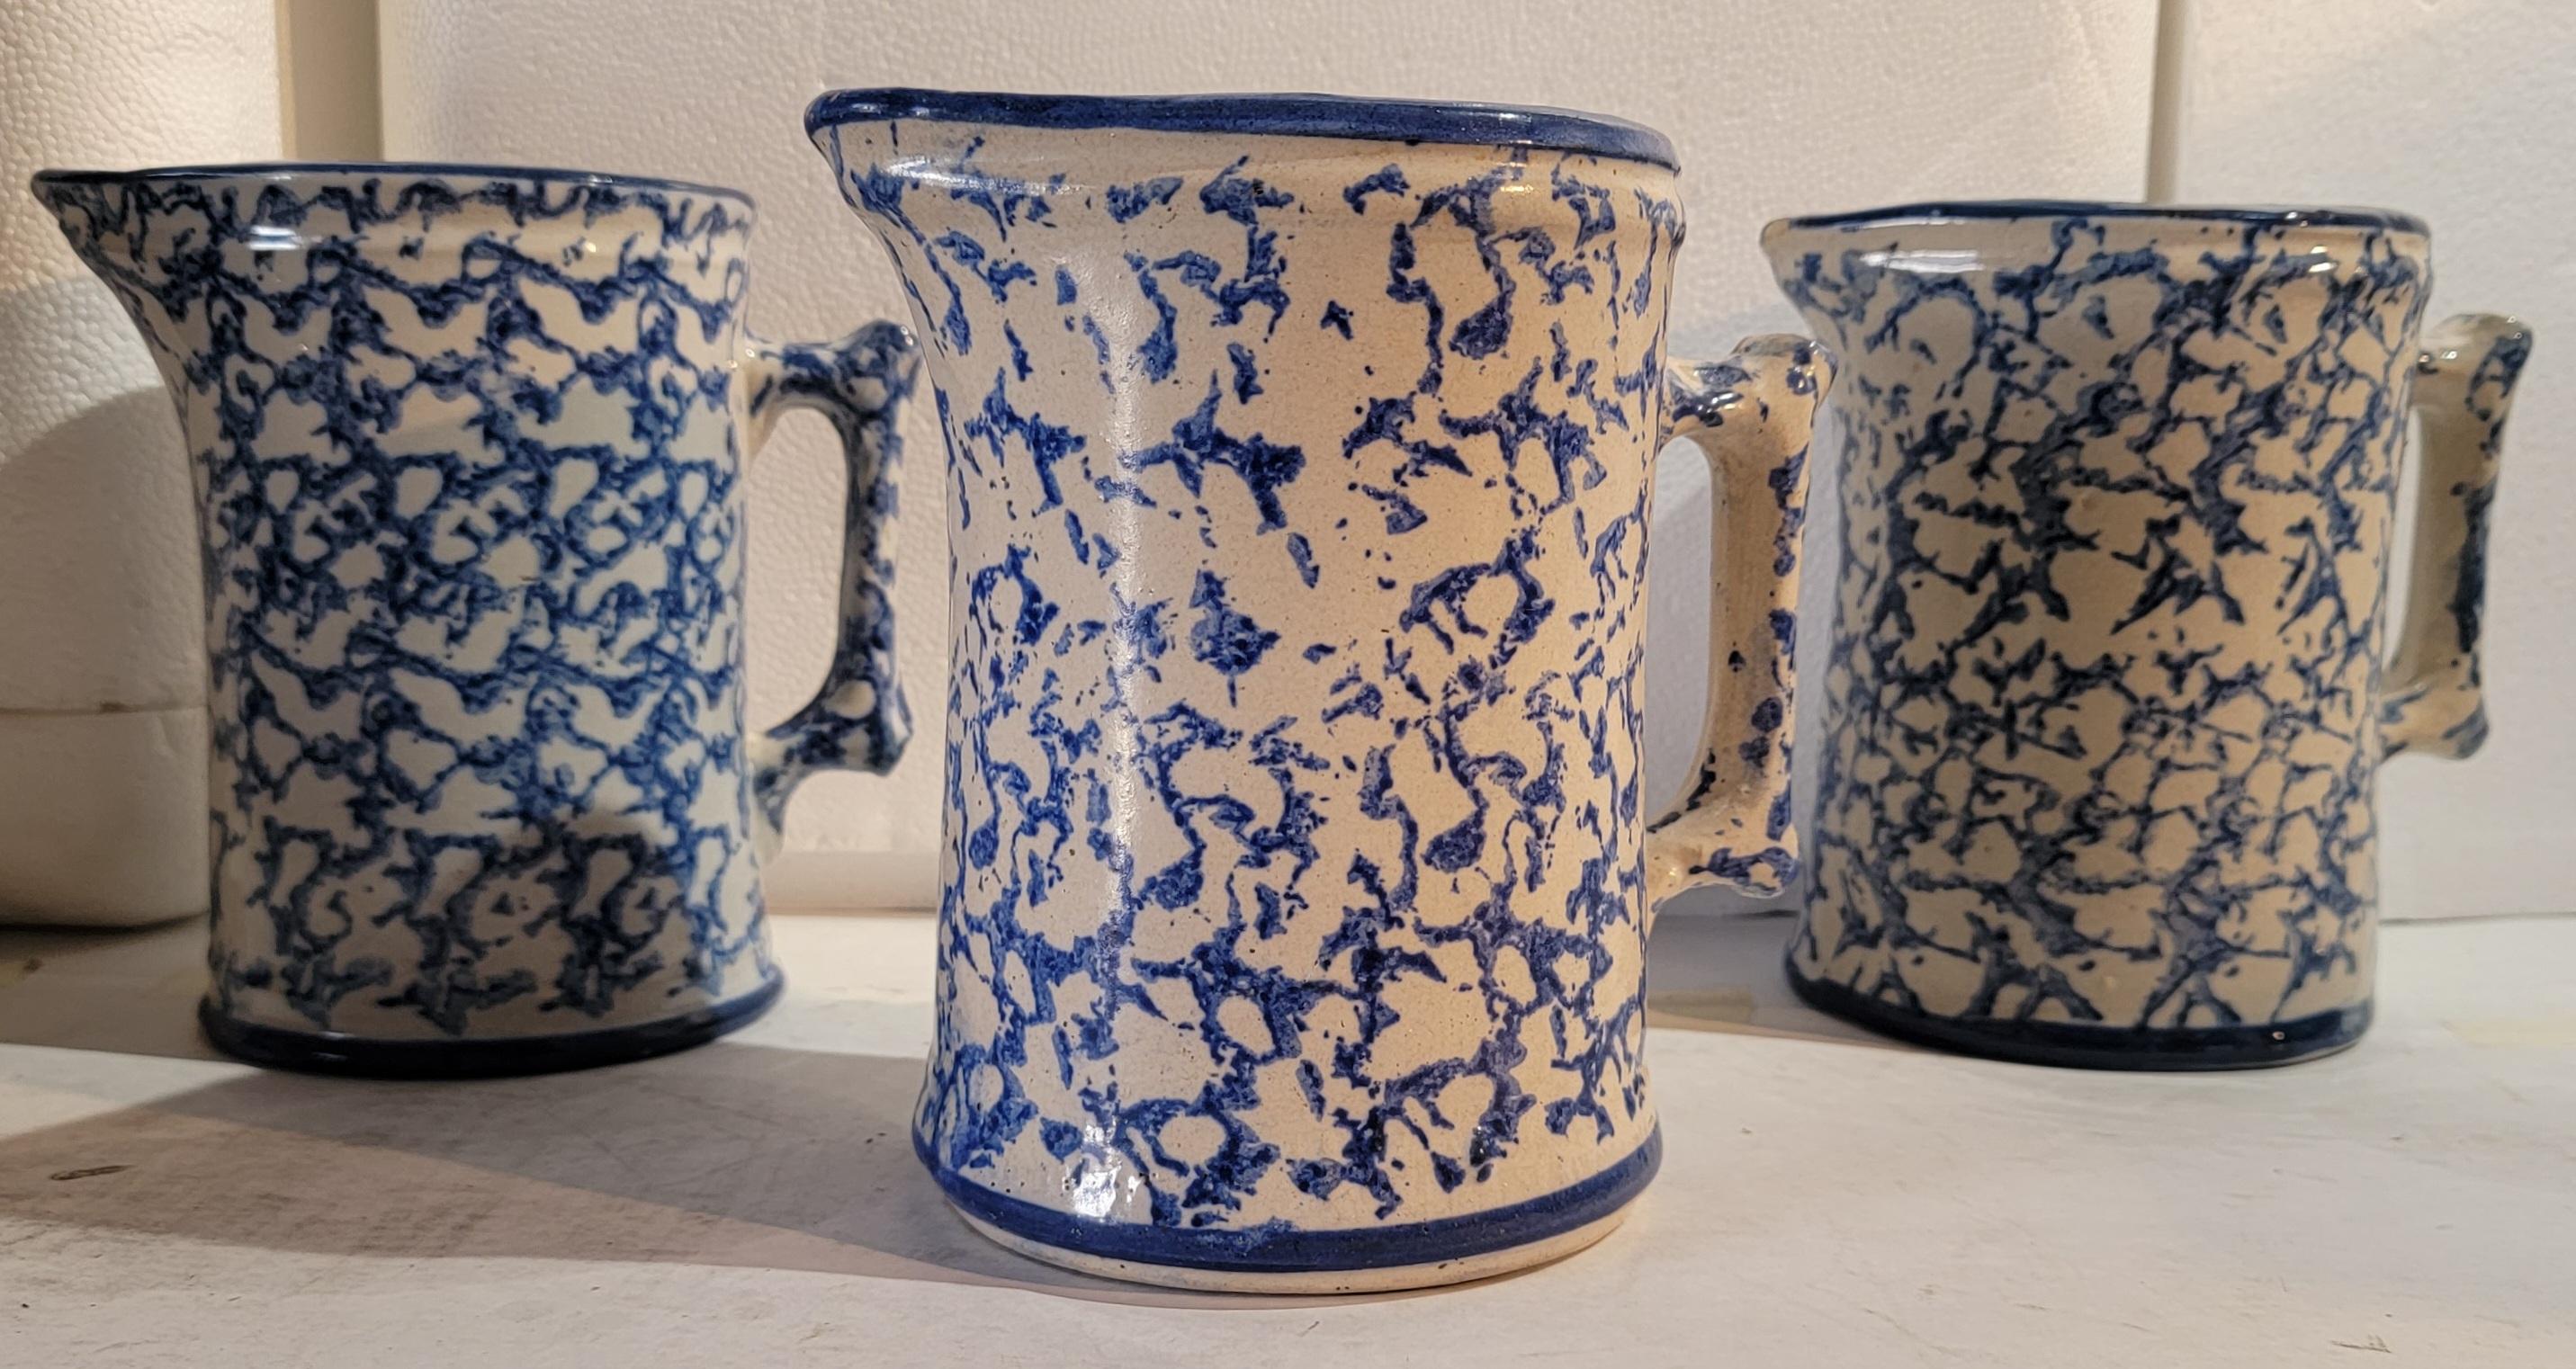 19th C Blue & white sponge ware pottery pitchers in good condition. These hard to find pottery pitchers are in different shades of blues. Sold as a group of three.